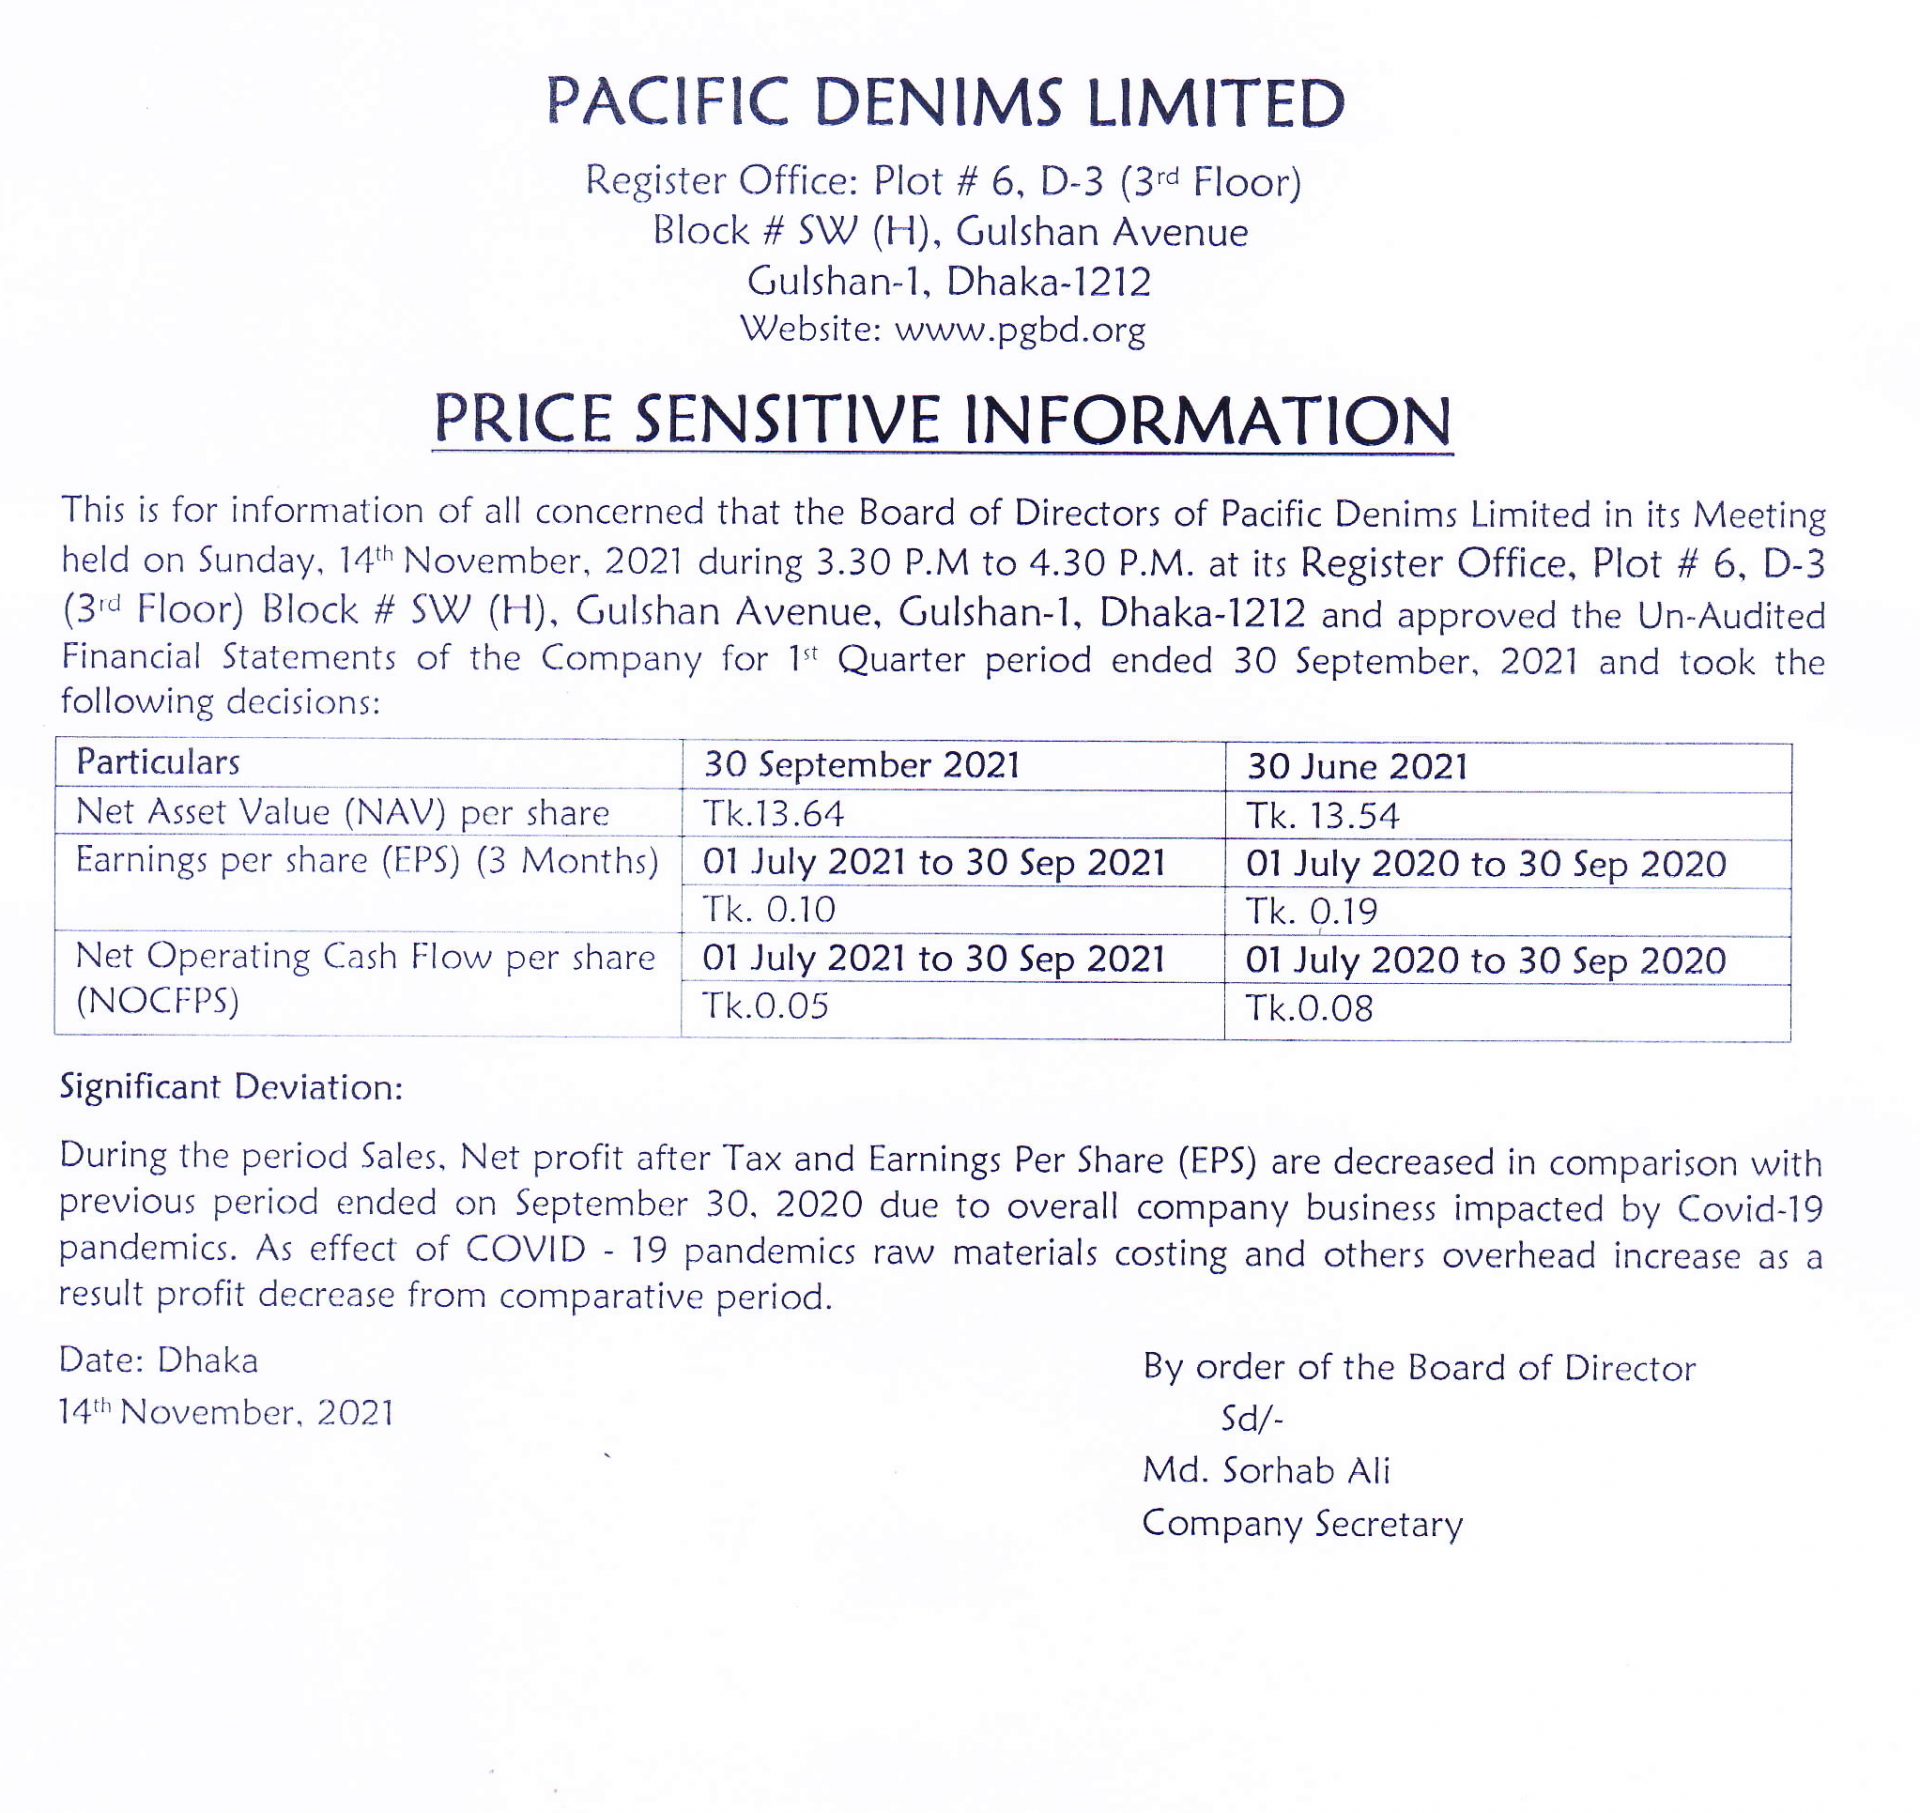 Un-Audited Financial Statements (First-Quarter) 30 September 2021 of Company Pacific Denims Ltd